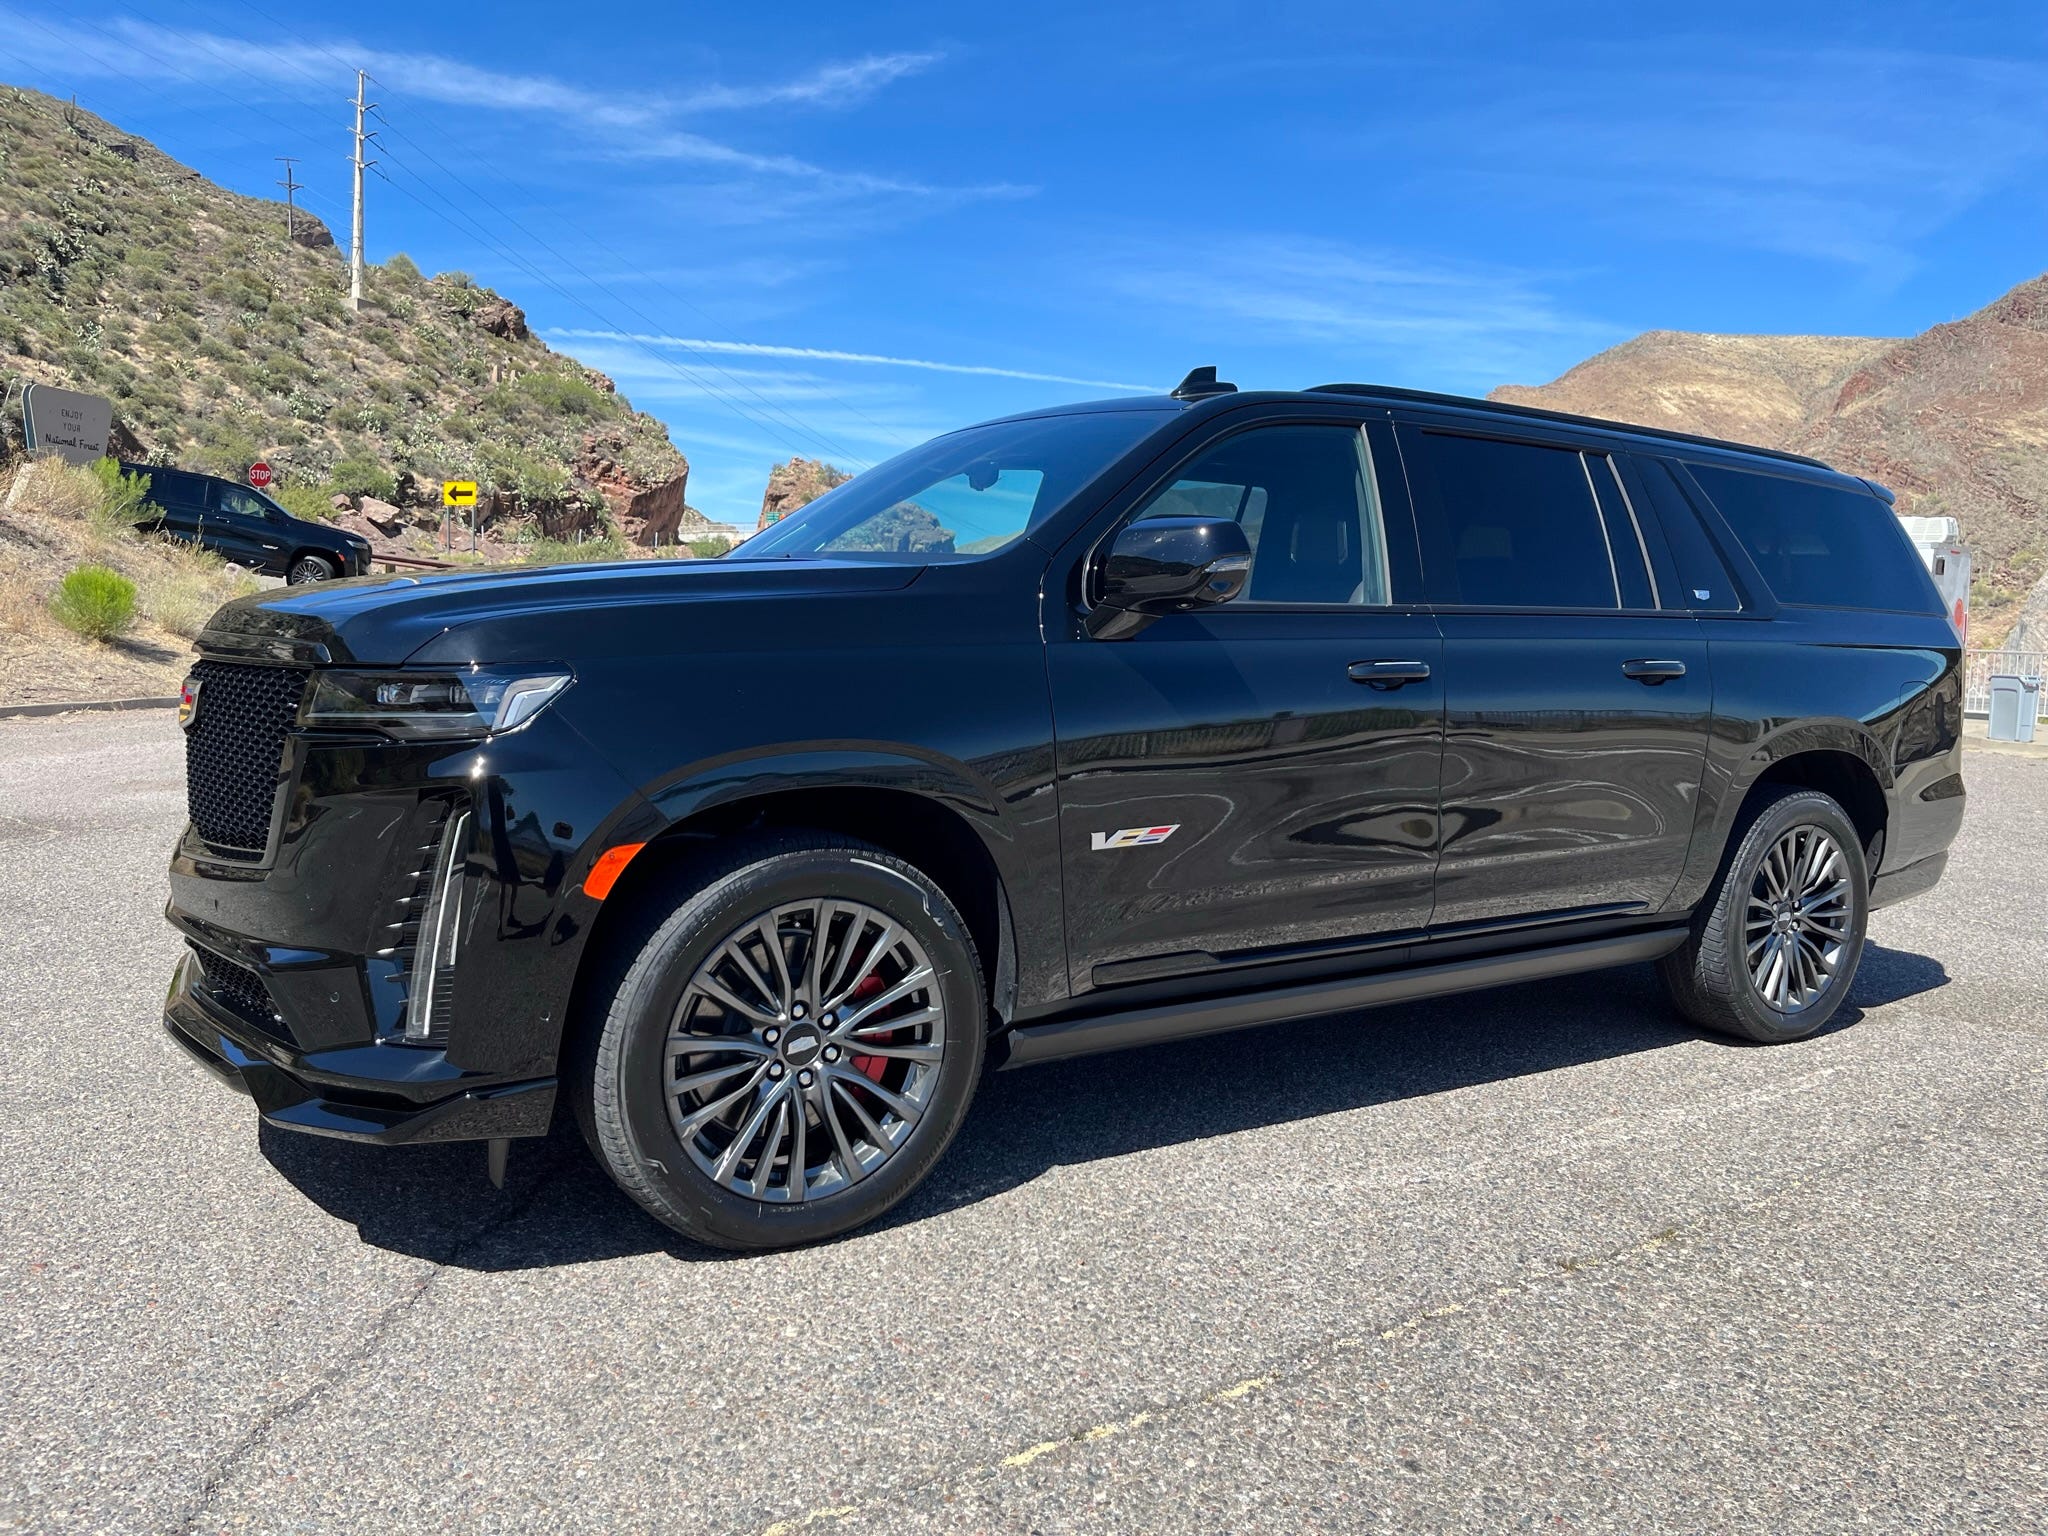 2023 Escalade-V is everything a Cadillac should be